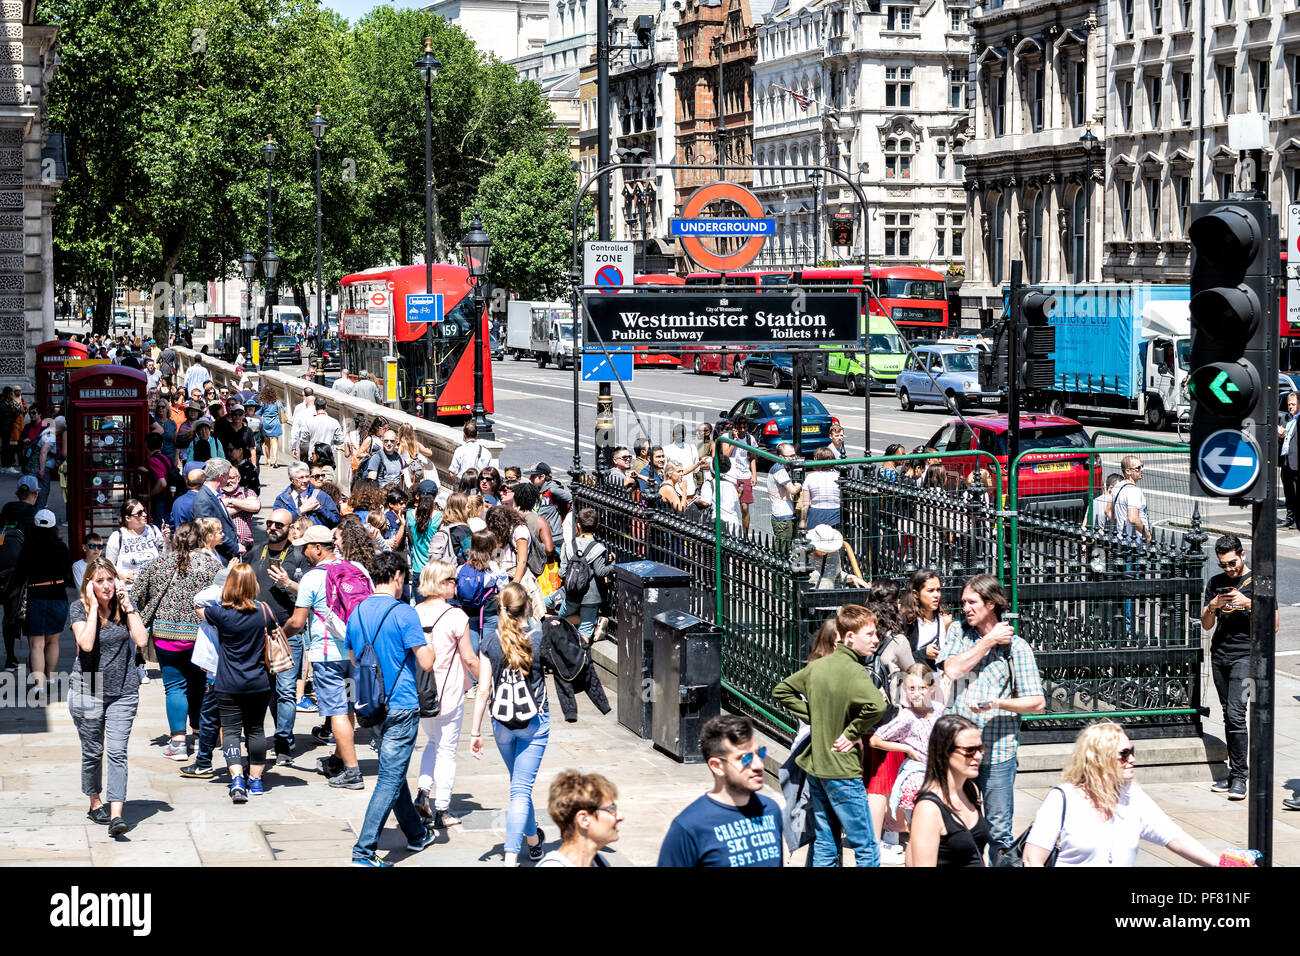 London, UK - June 22, 2018: Westminster station entrance, exit at Great George Street with many people walking, crowd, crowded road Stock Photo